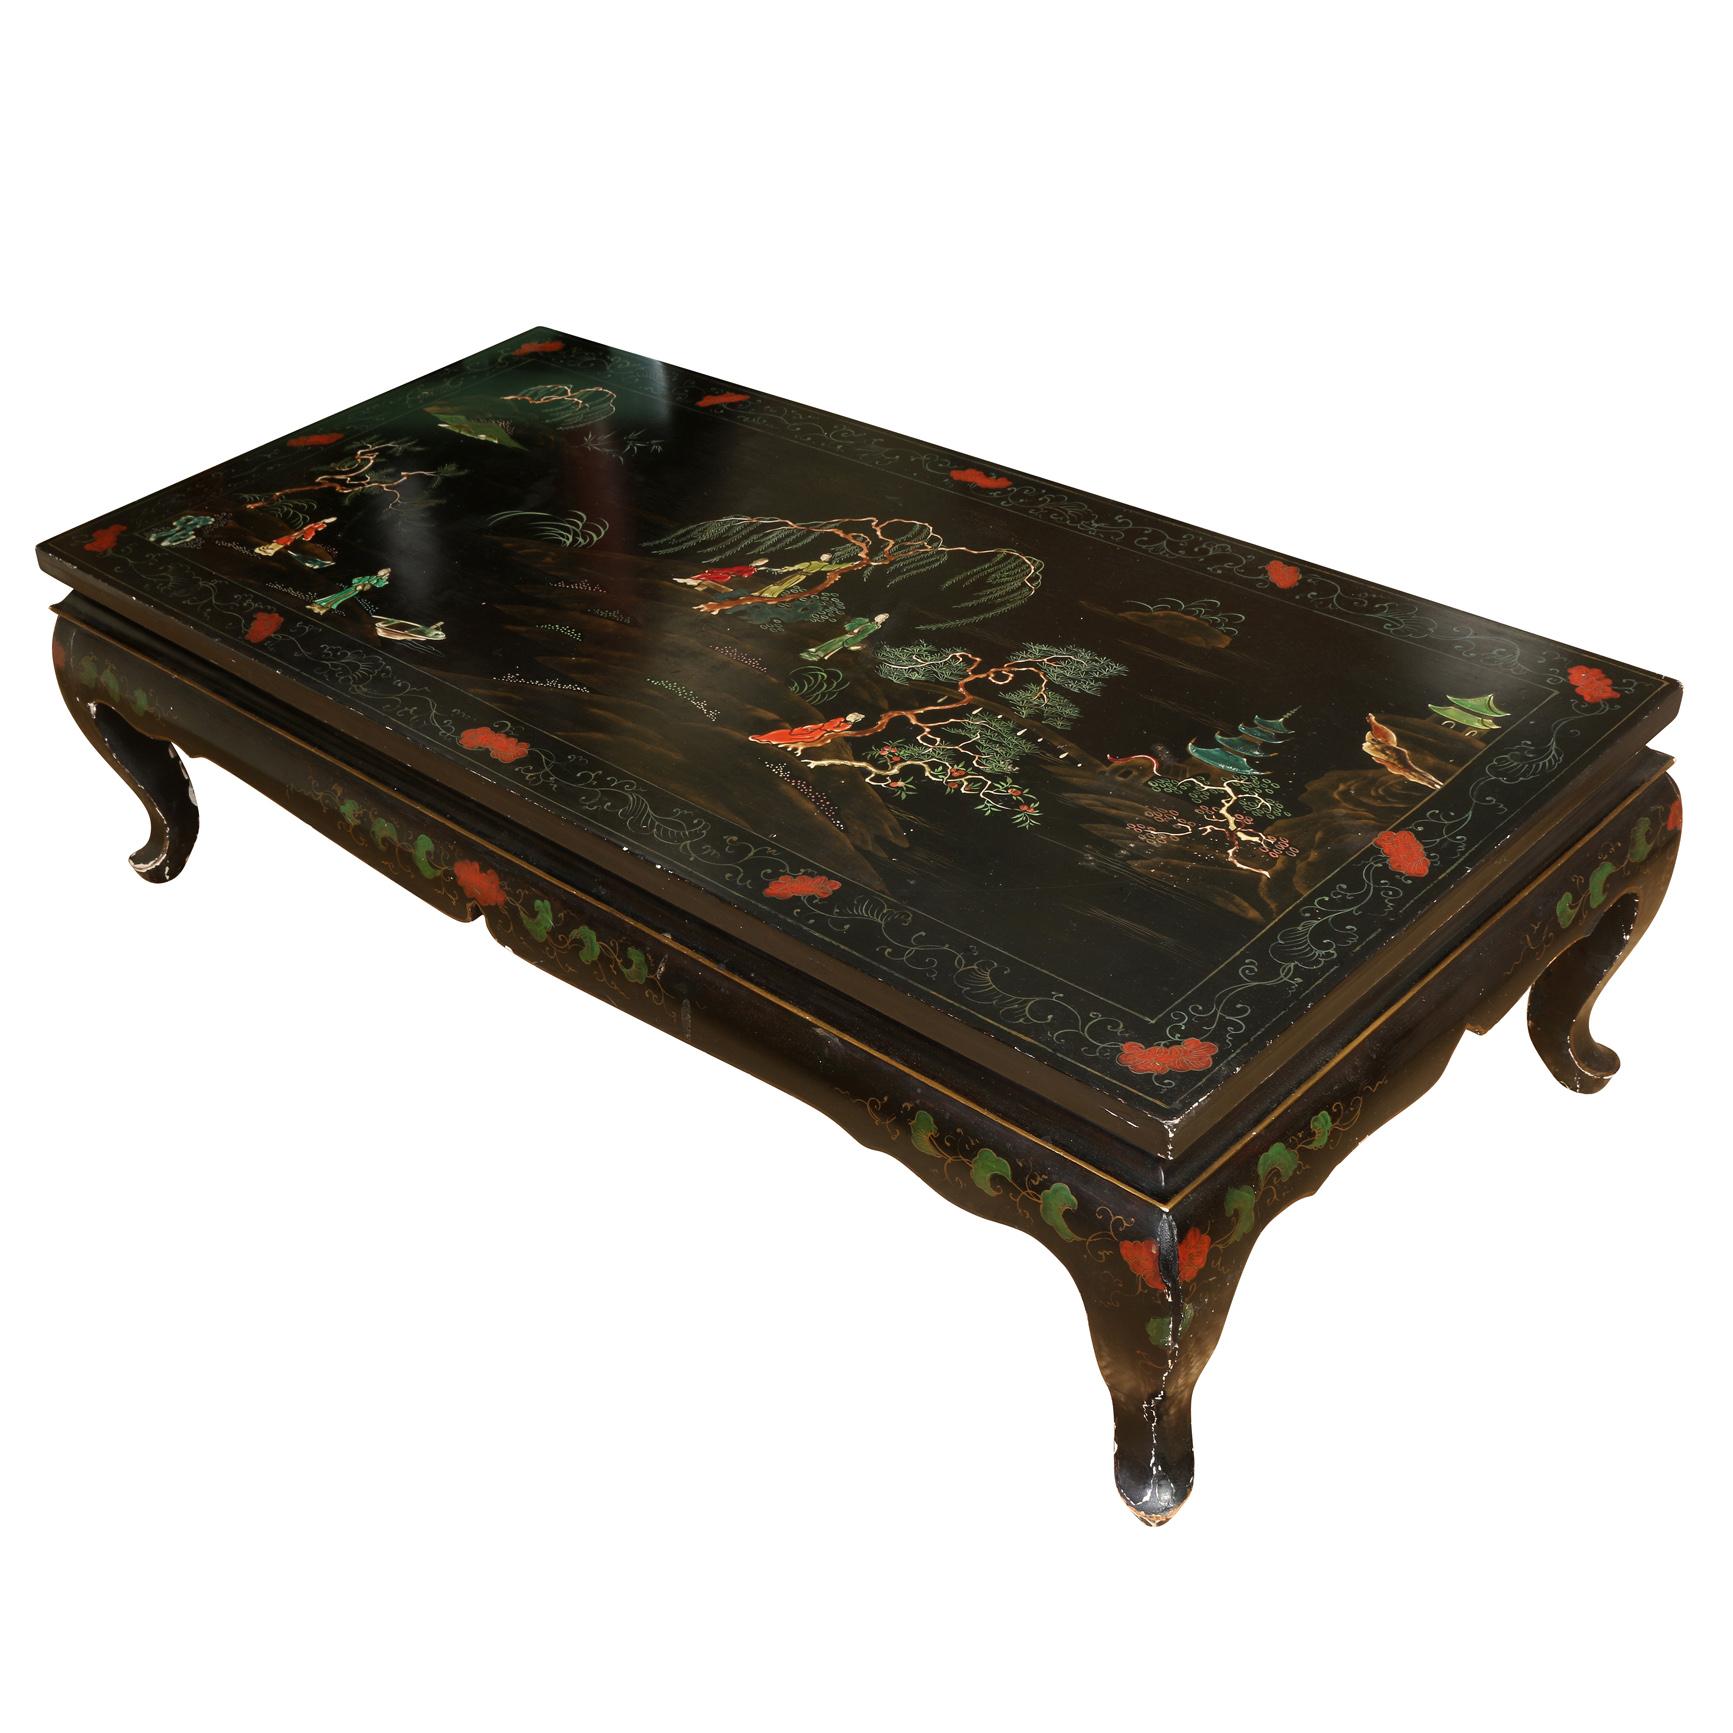 A vintage Asian style coffee table, colorfully handpainted depicting figures and trees in landscapes. Table is rectangular with cabriole legs.